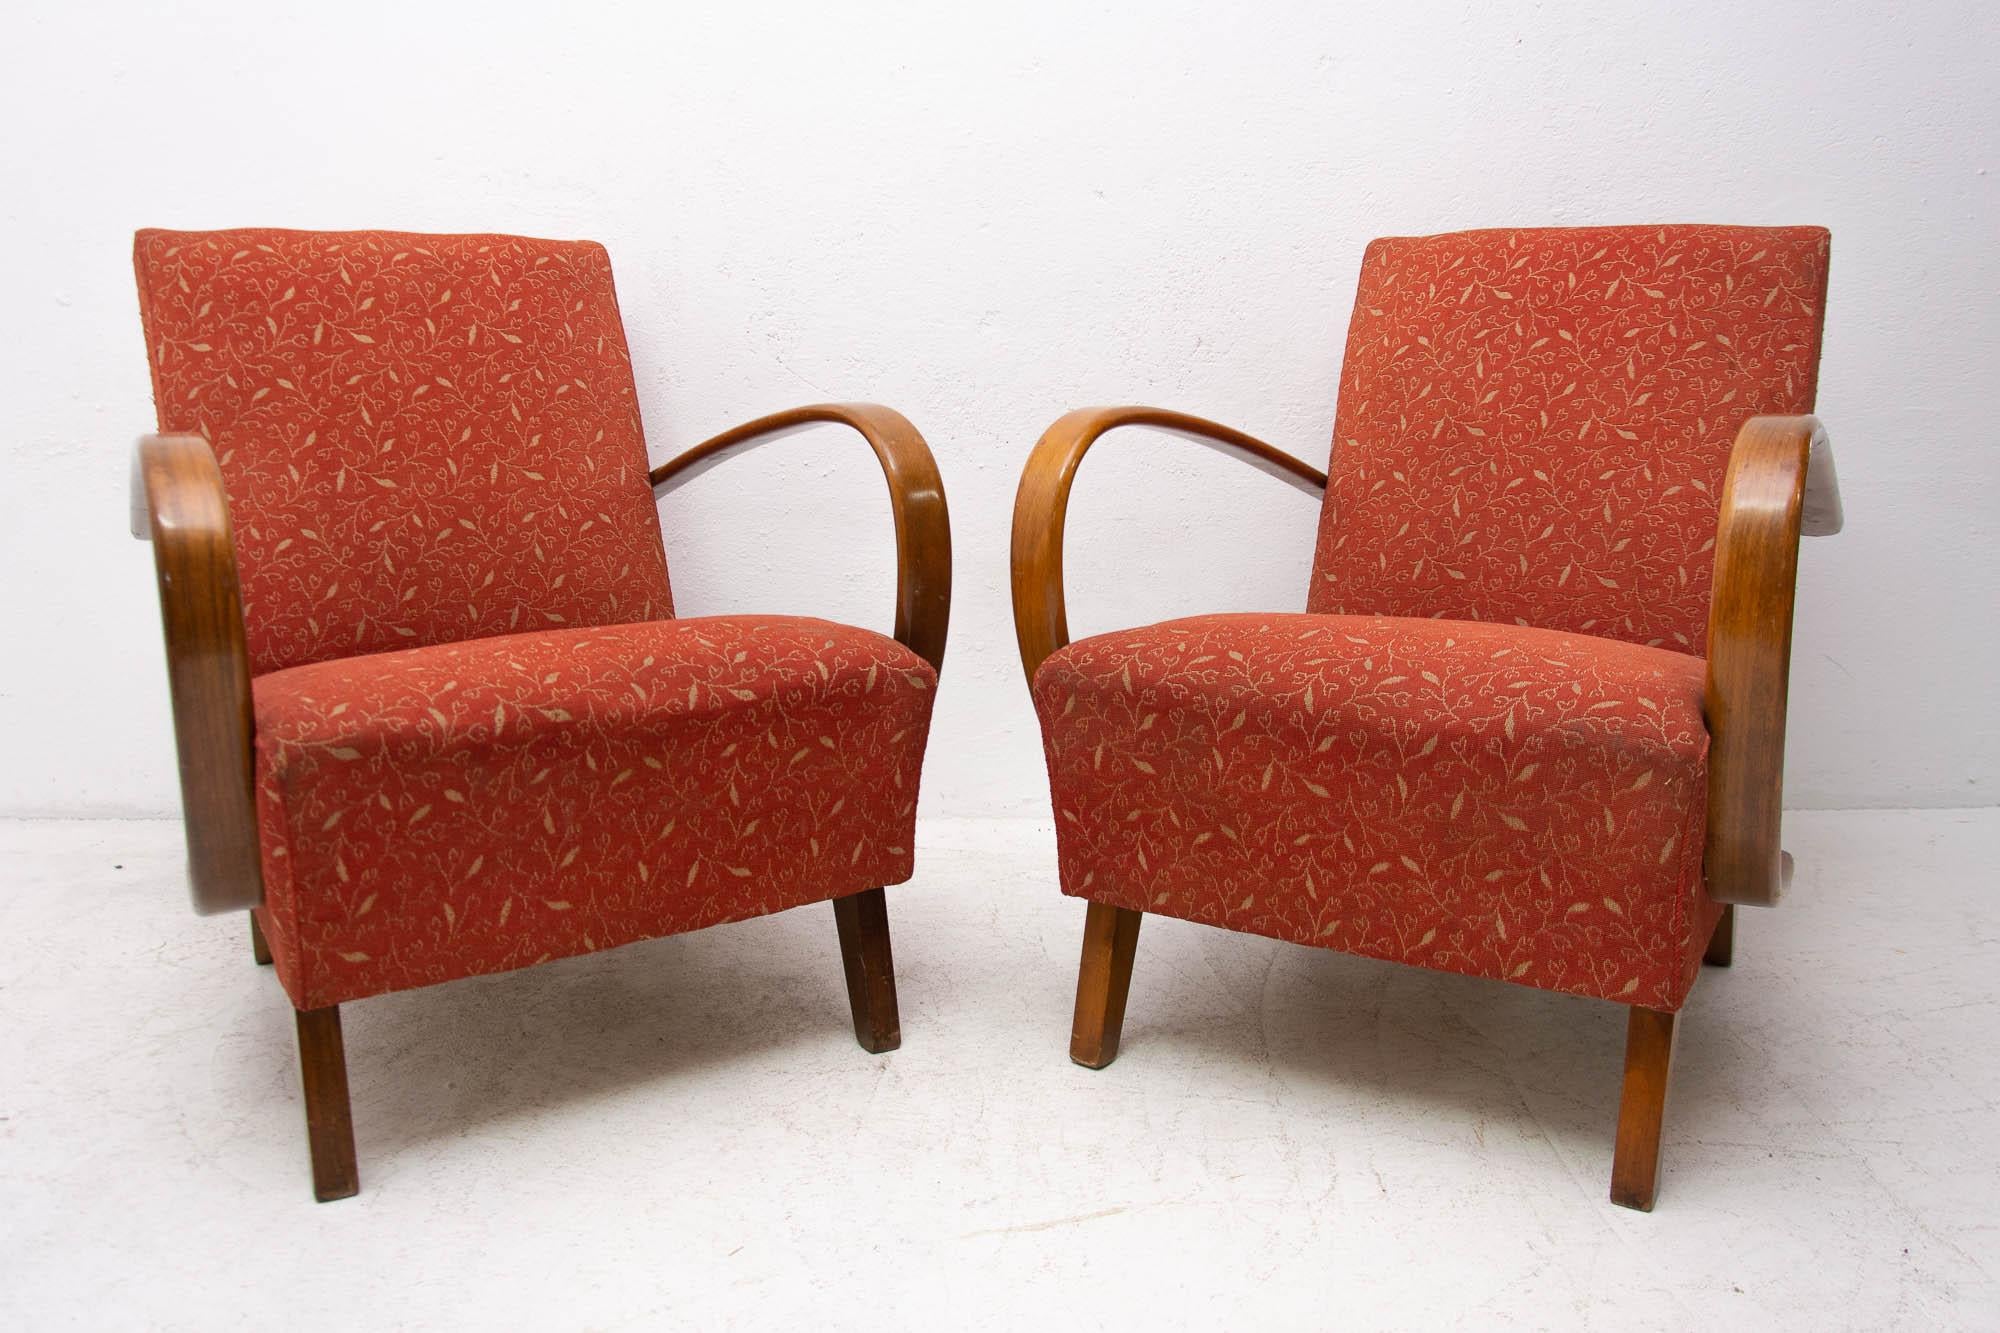 In a few places, the fabric bears the marks of age in the form of minor scratches, on the back of one chair, the upholstery filling is slightly damaged (loose filling).
Nevertheless, the chairs can be used as they are. Price is for the